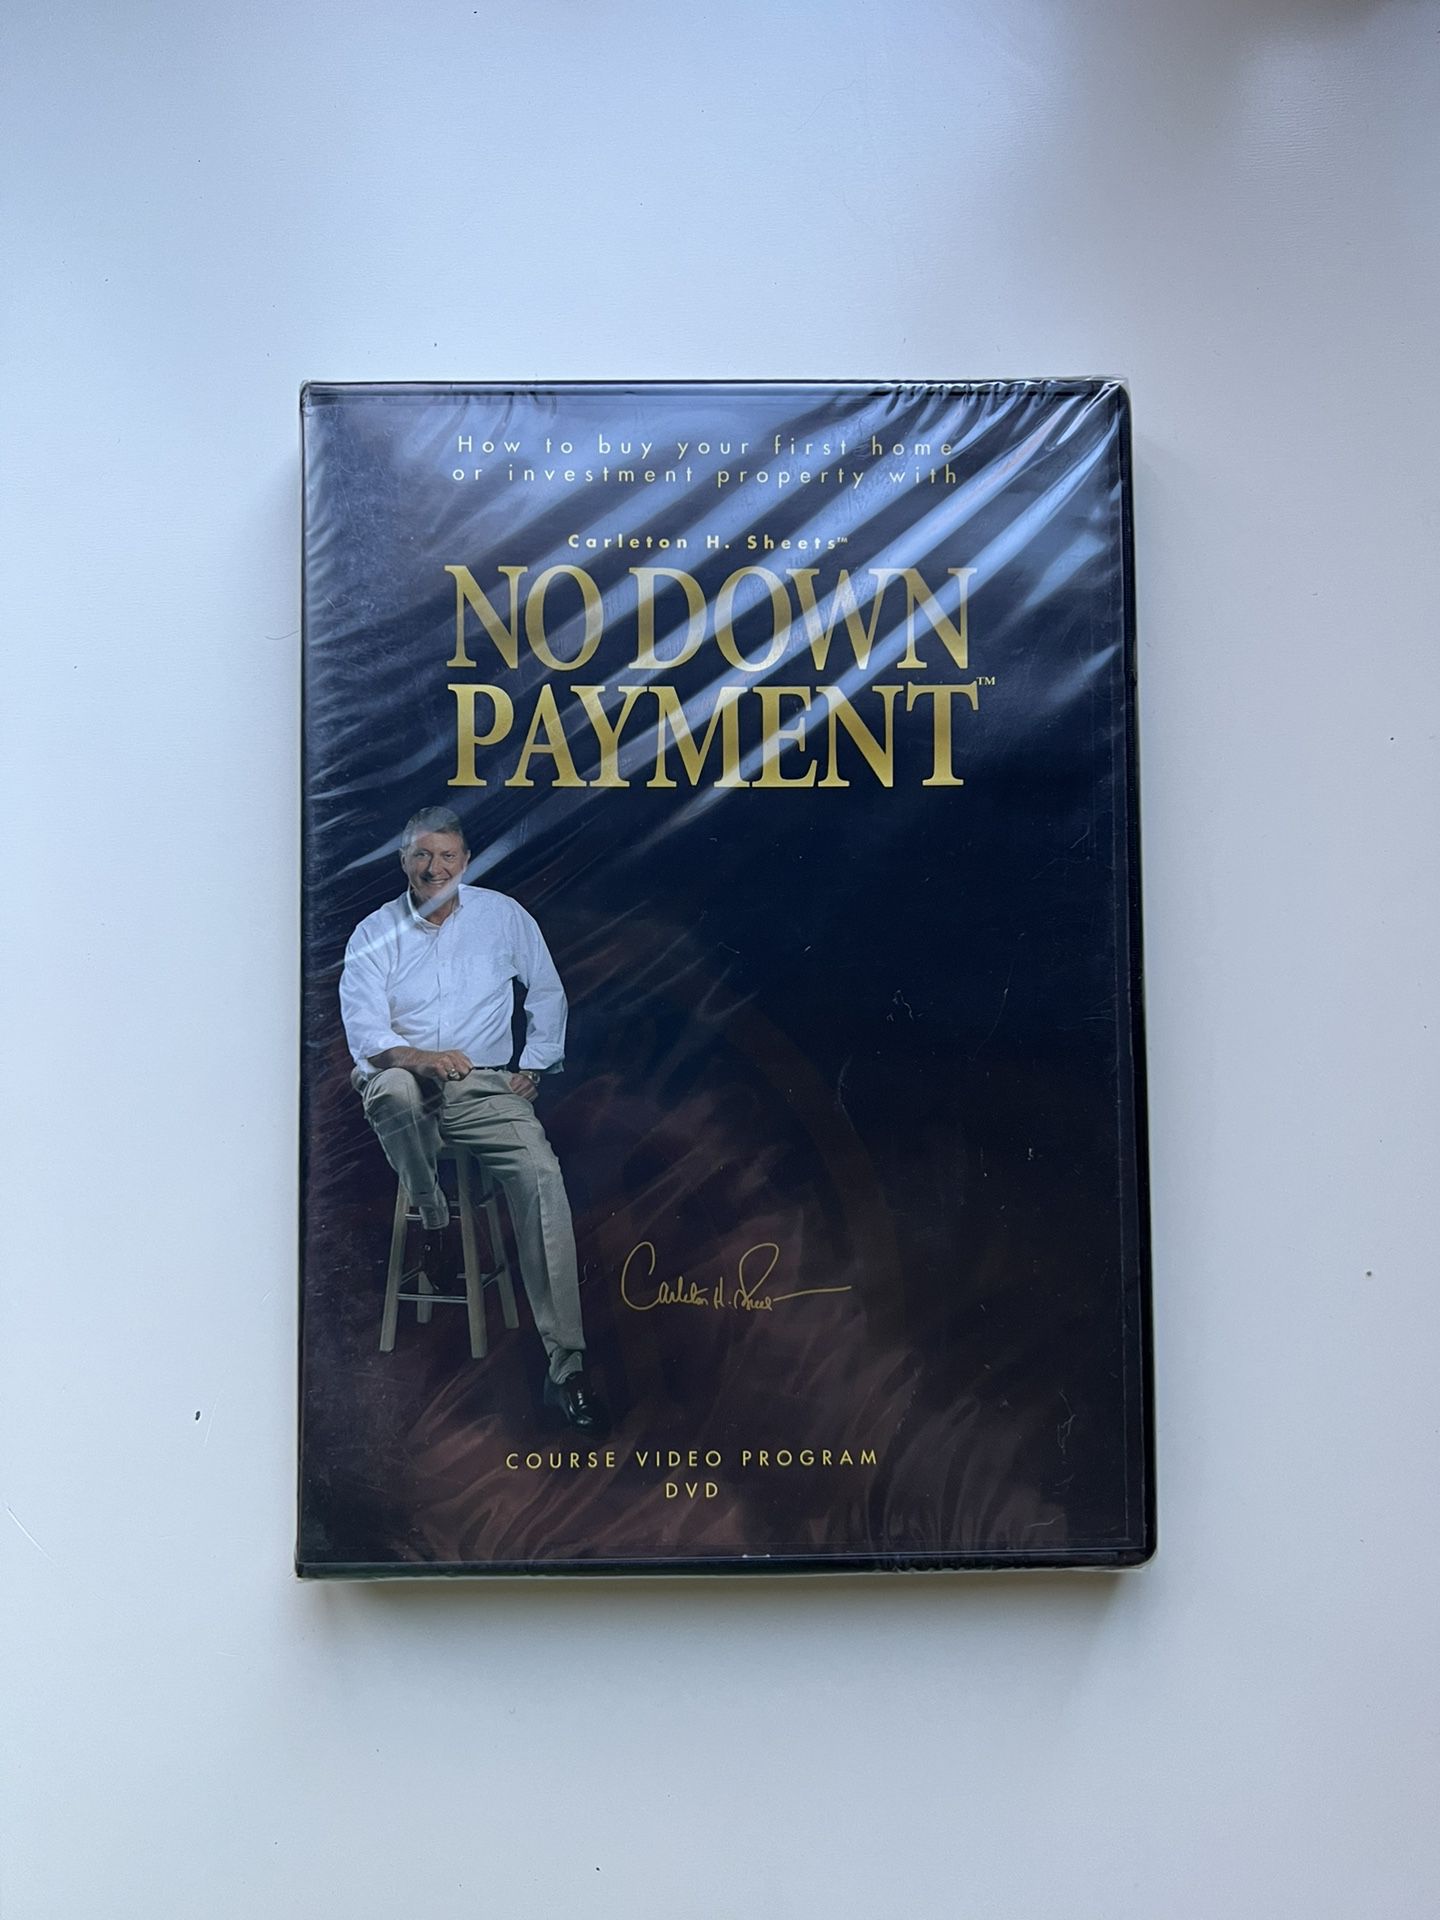 Carleton H Sheets No Down Payment Course Video Program DVD Investment Sealed